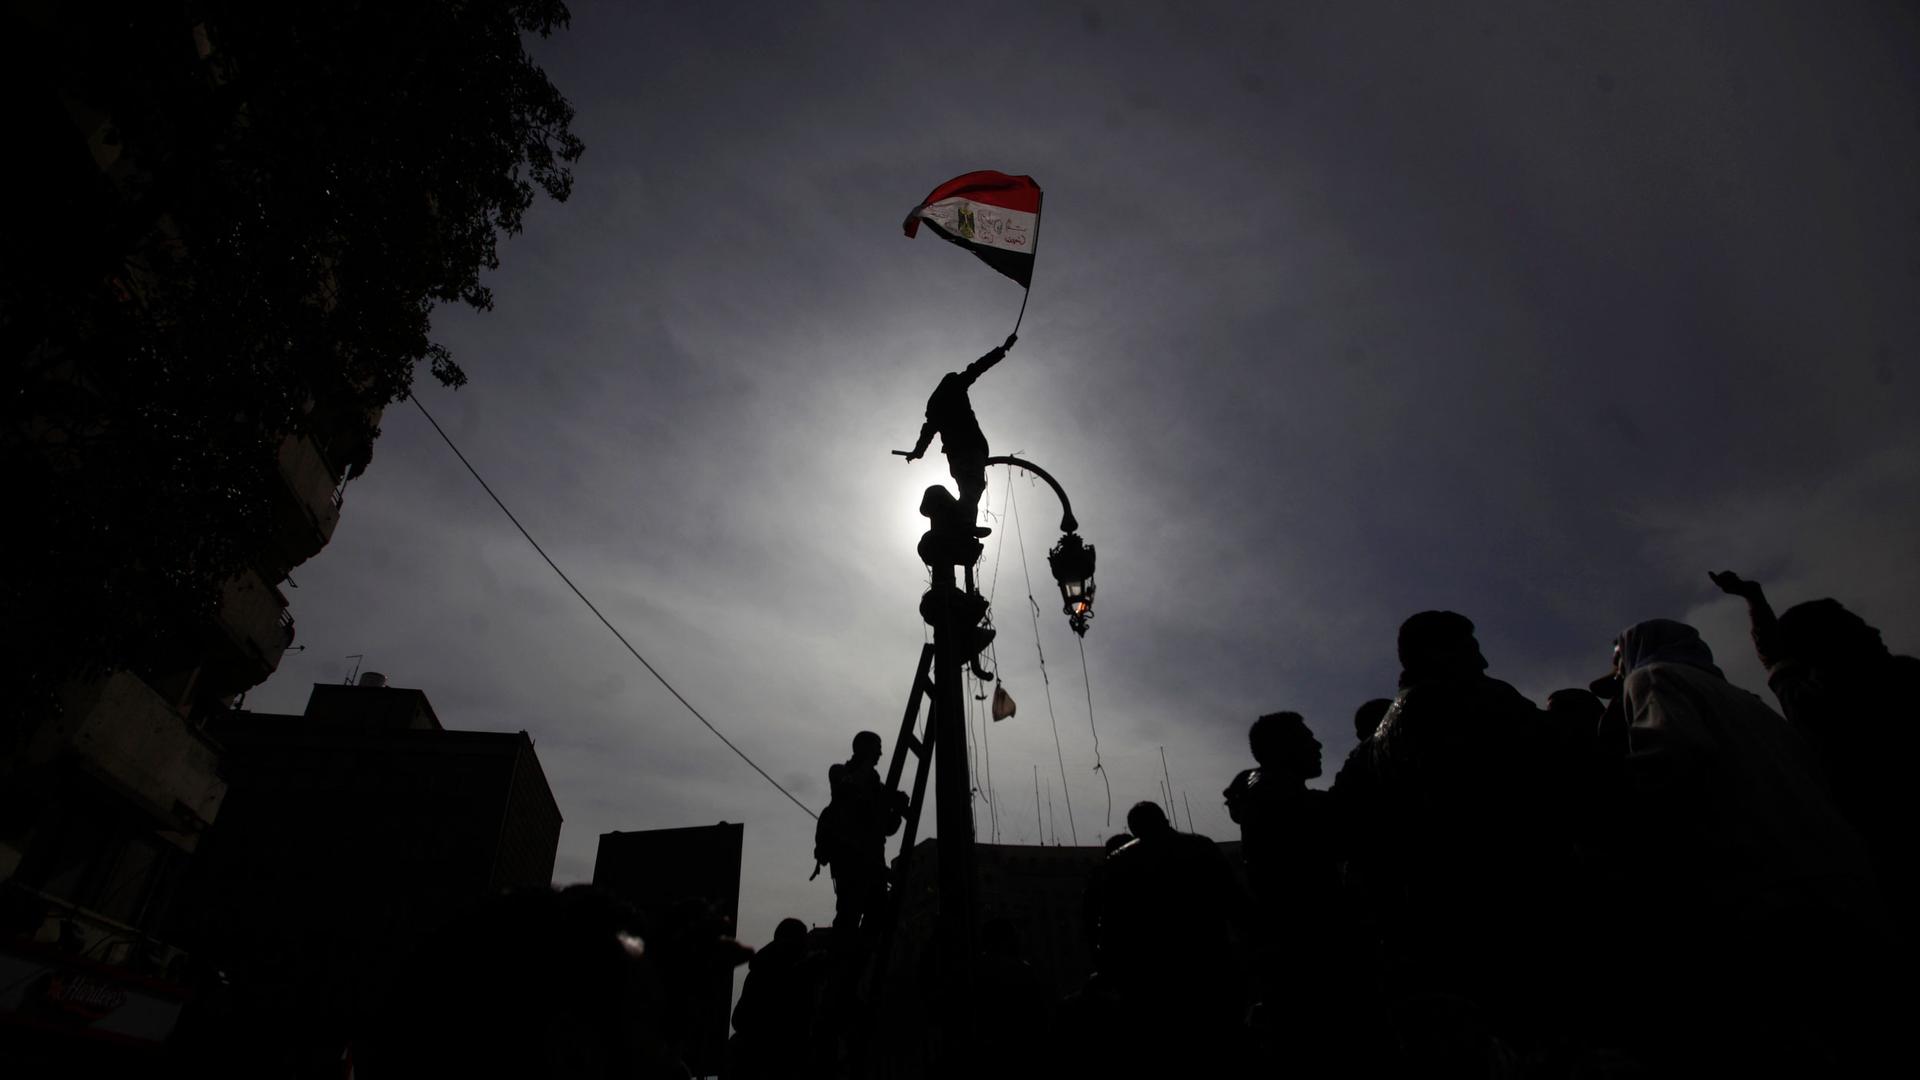 A protester is shown standing on top of a street light and holding the Egyptian flag while blocking the sun and creating a shadow.